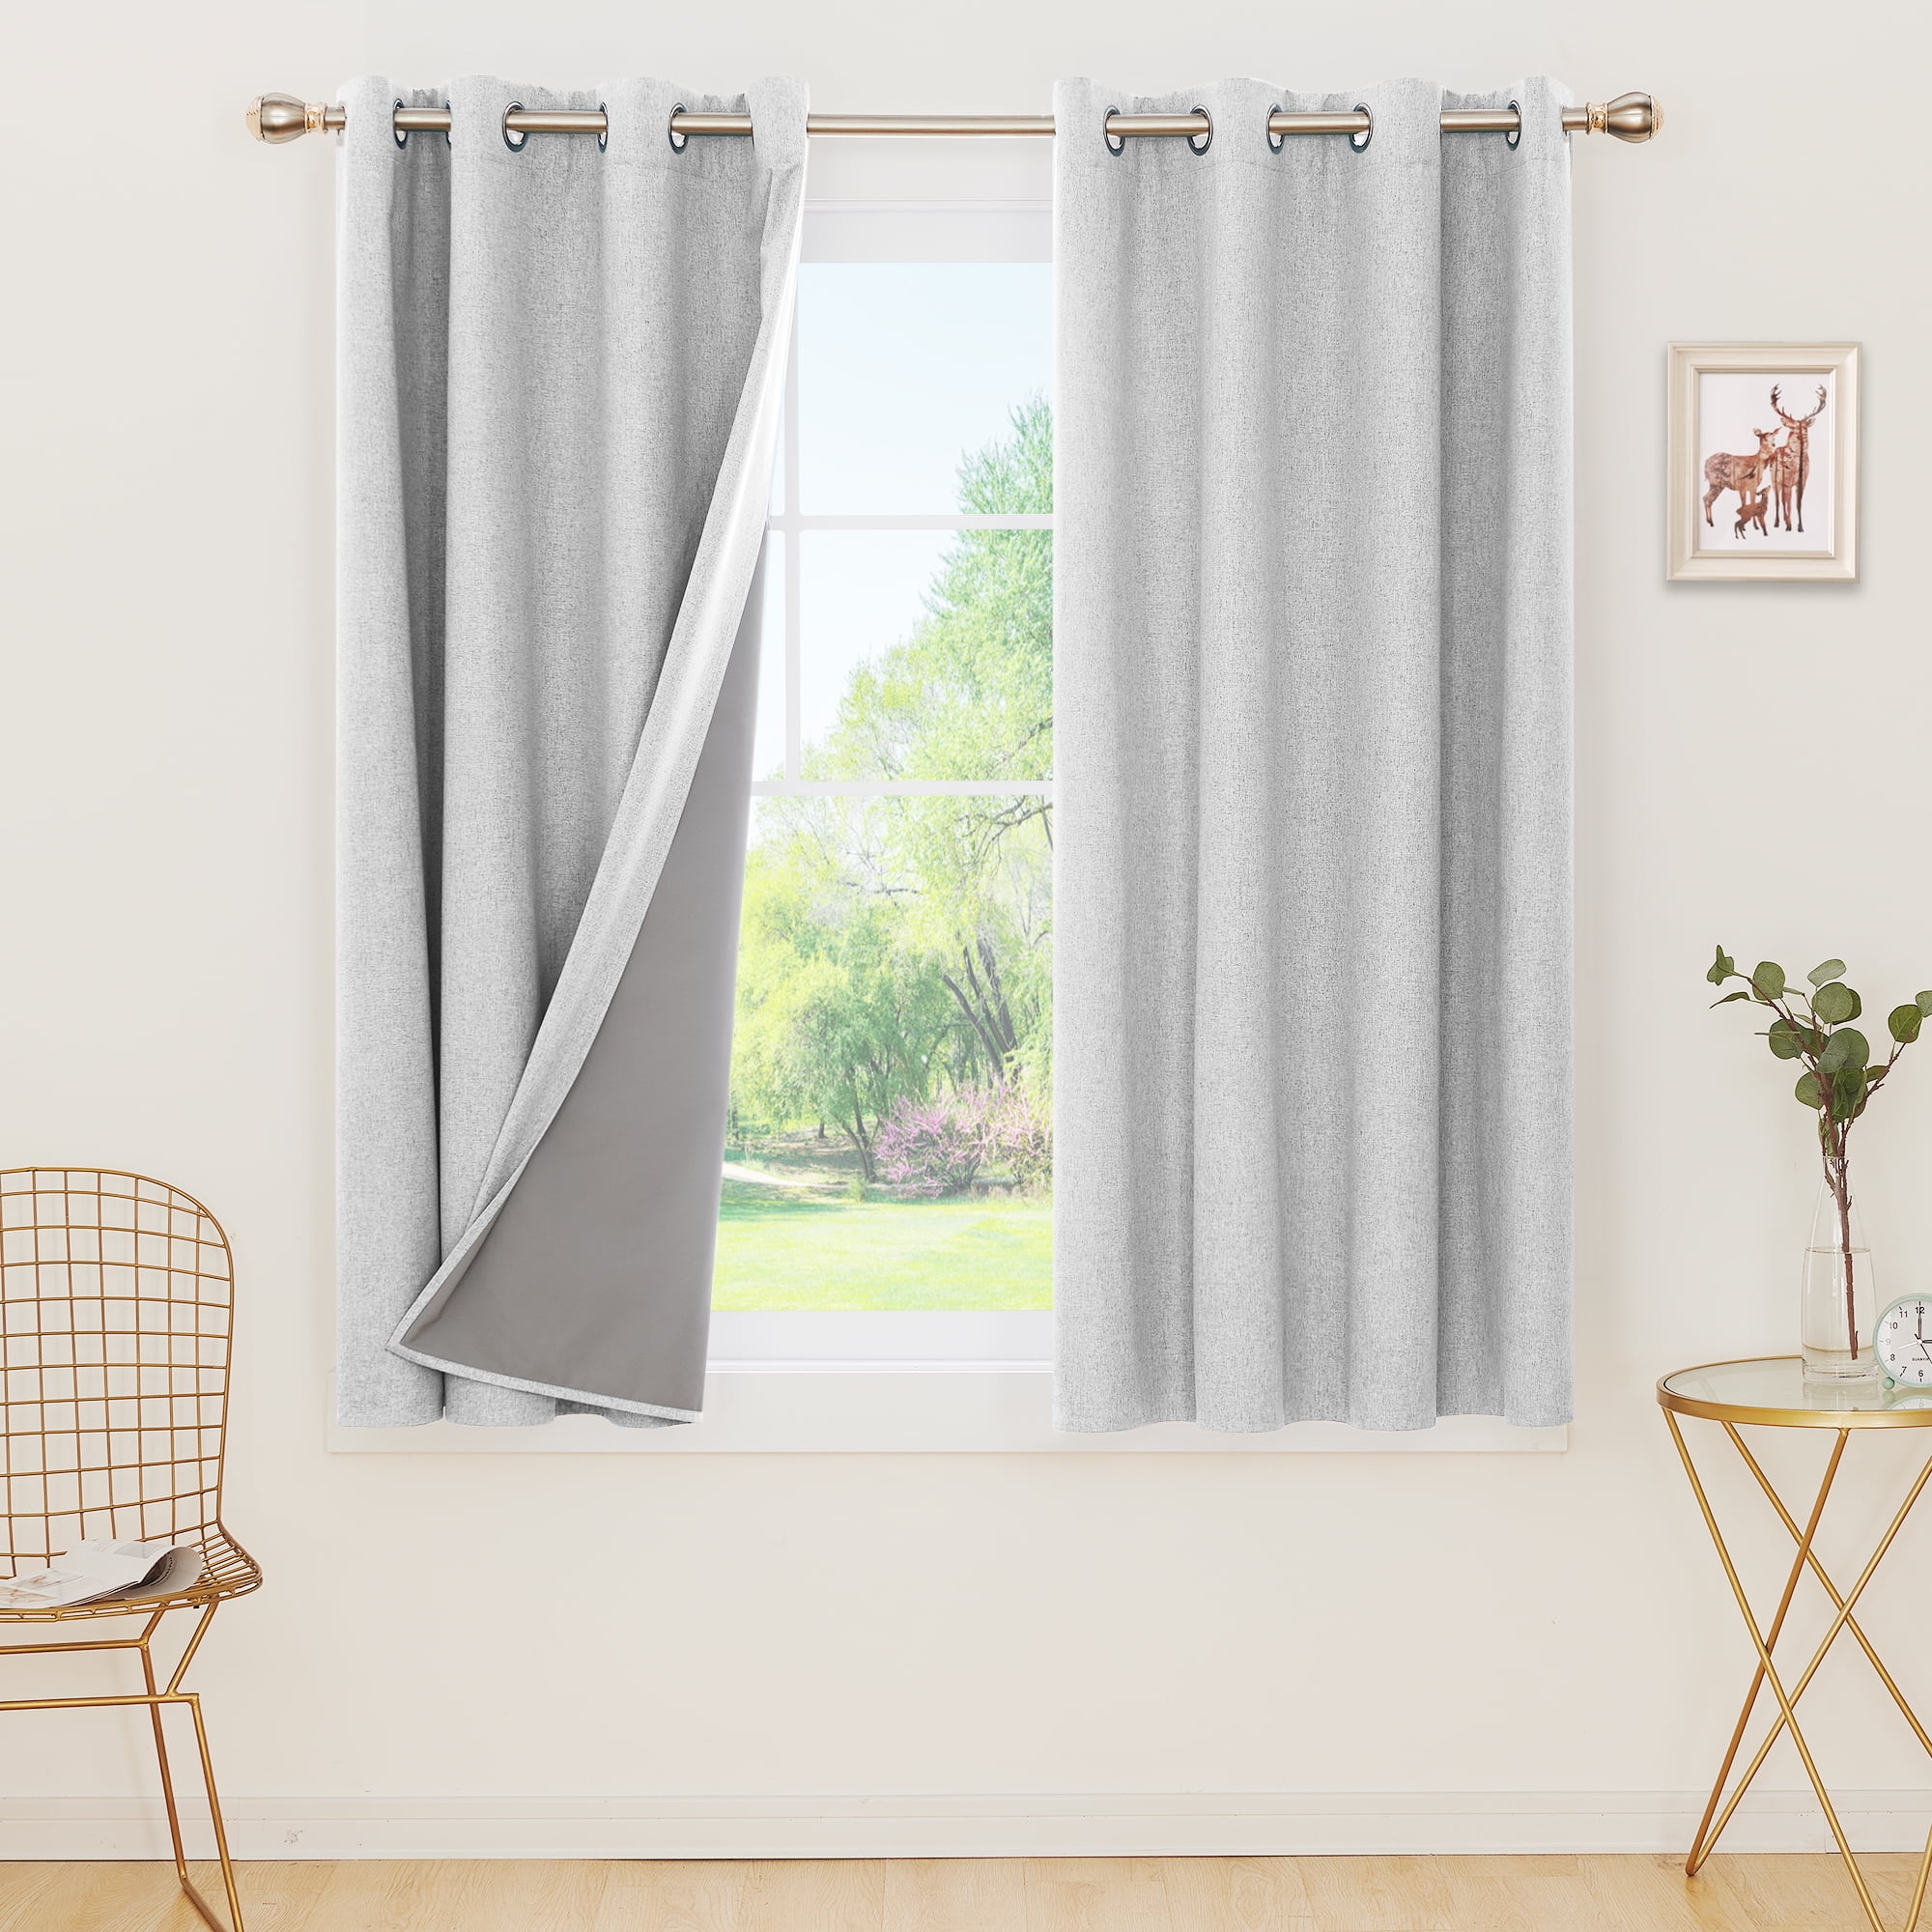 Insulated Curtains For Summer